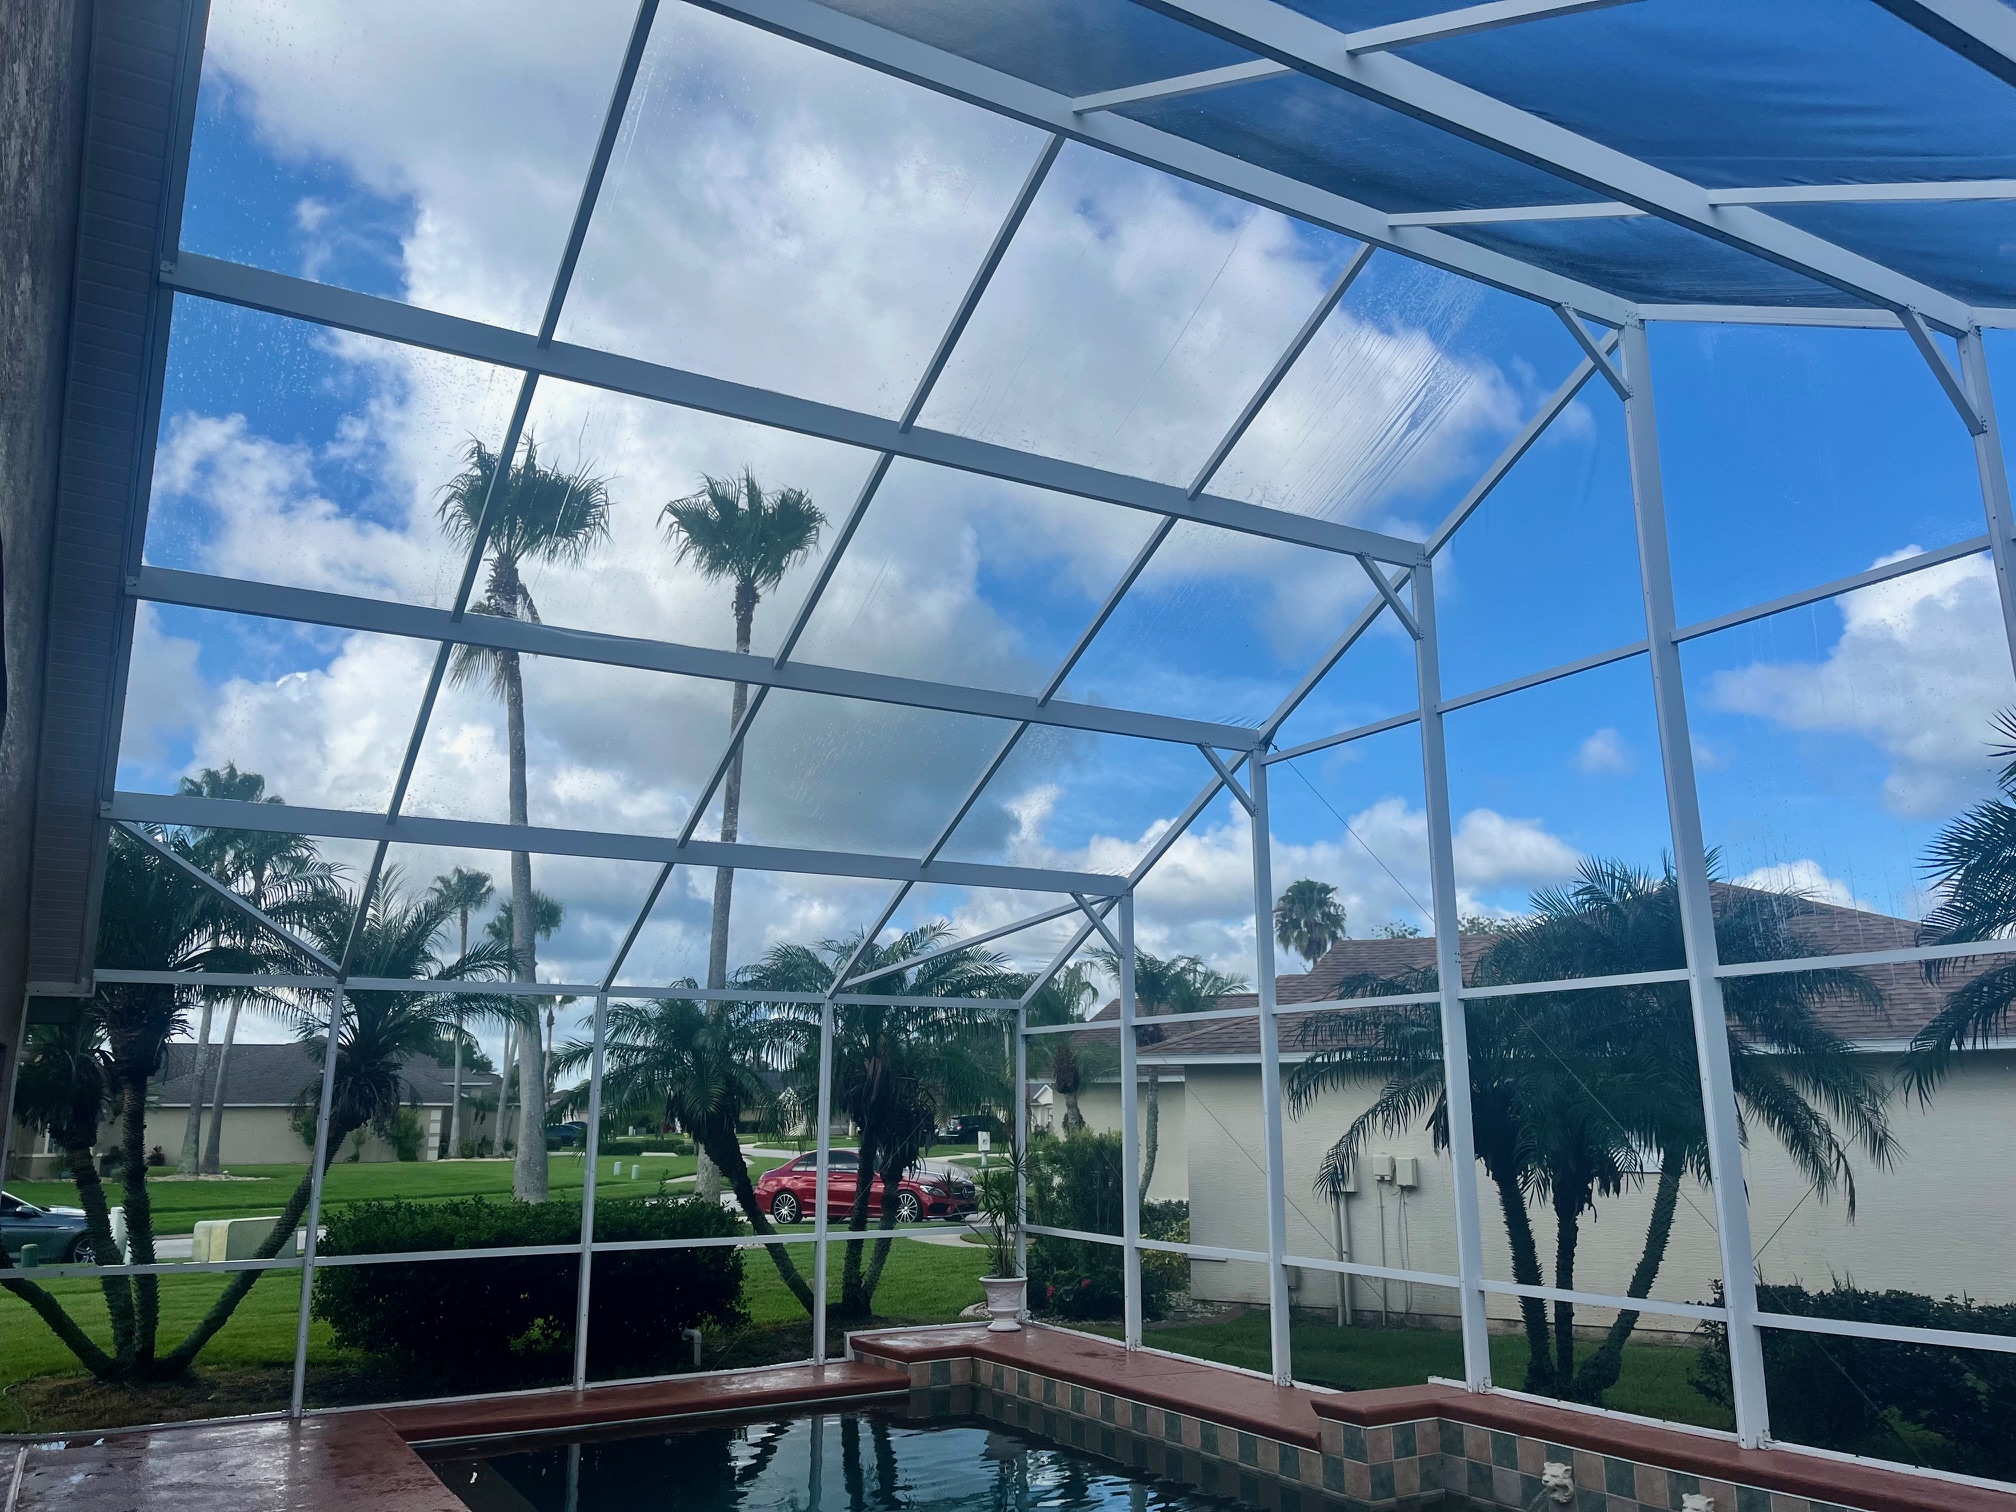 Pool Enclosure Cleaning Project In Port Orange, Florida (1)